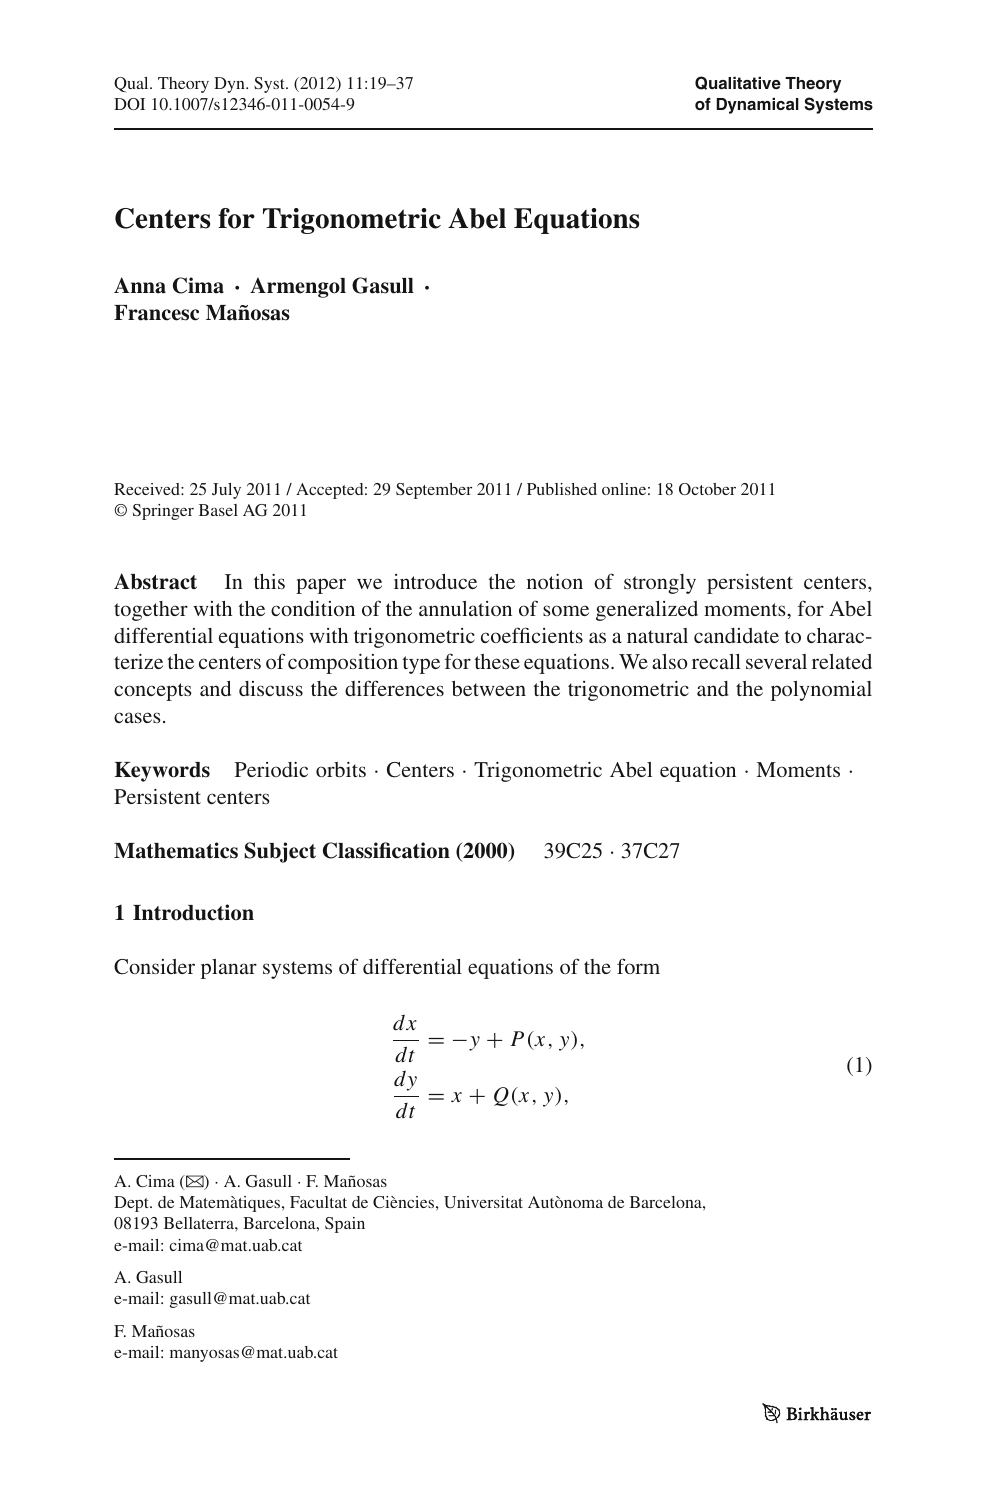 Centers For Trigonometric Abel Equations Topic Of Research Paper In Mathematics Download Scholarly Article Pdf And Read For Free On Cyberleninka Open Science Hub